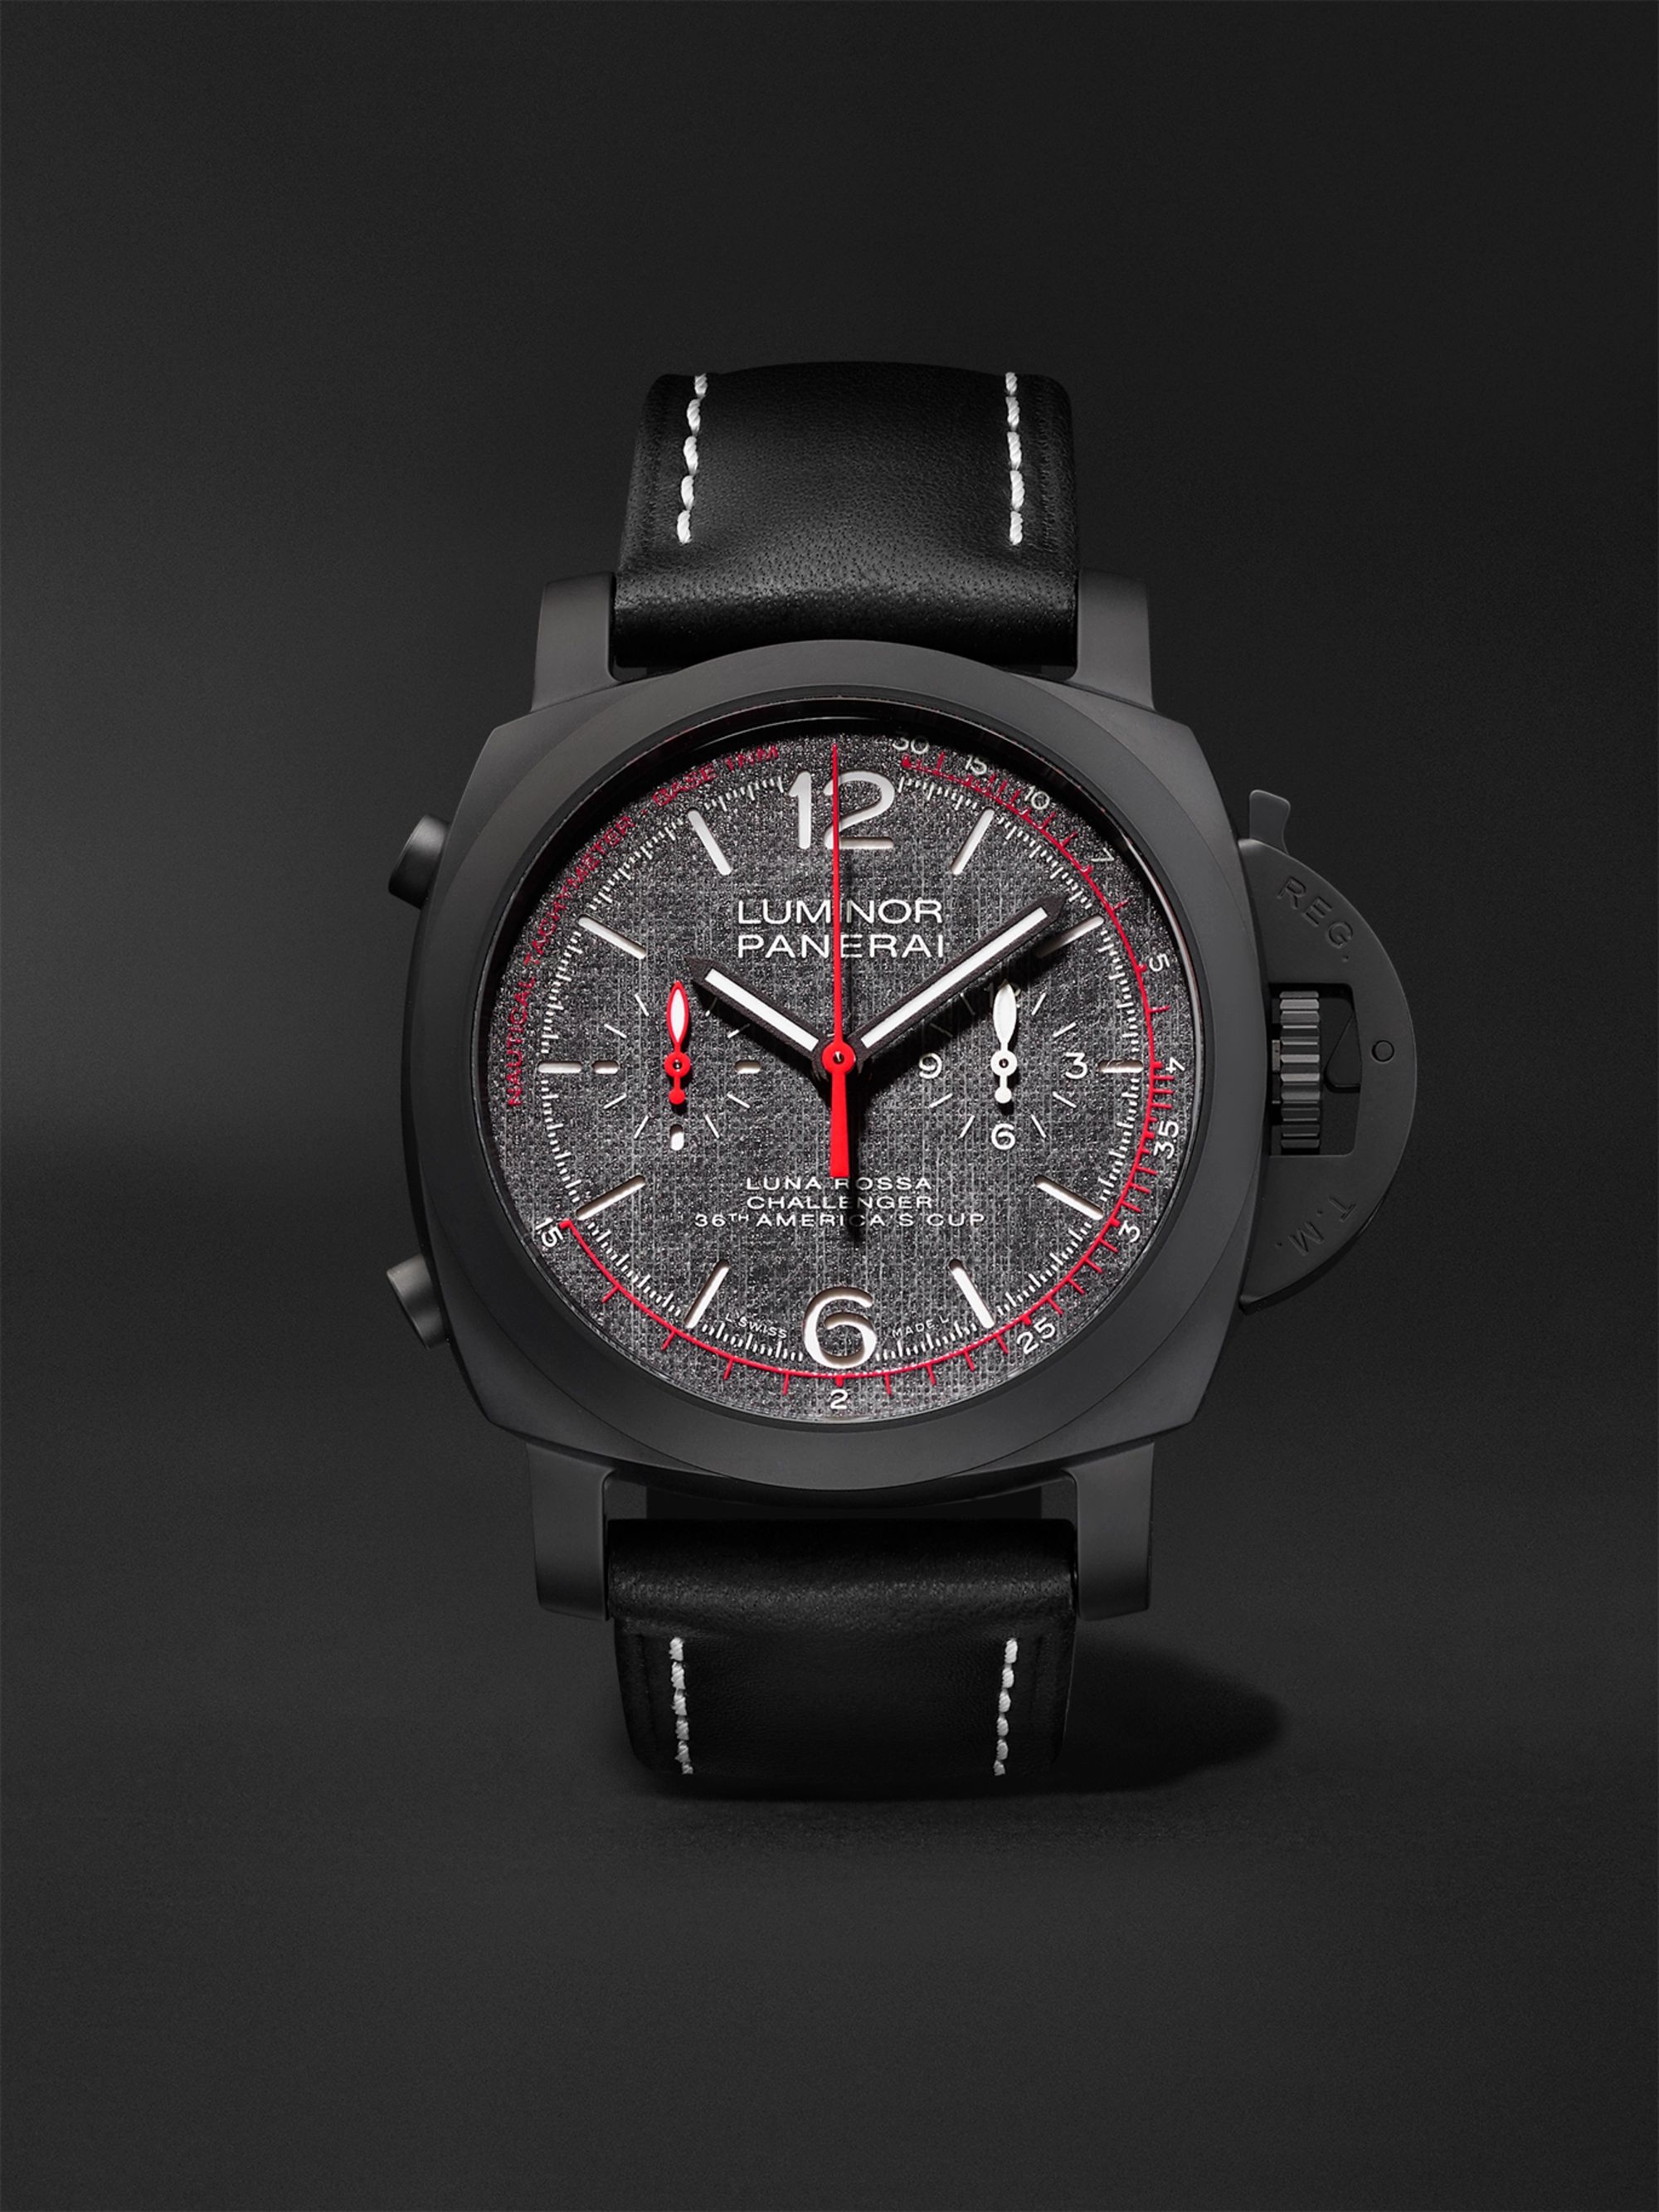 PANERAI Luminor Luna Rossa Automatic Flyback Chronograph 44mm Ceramic and Leather Watch, Ref. No. PAM01037